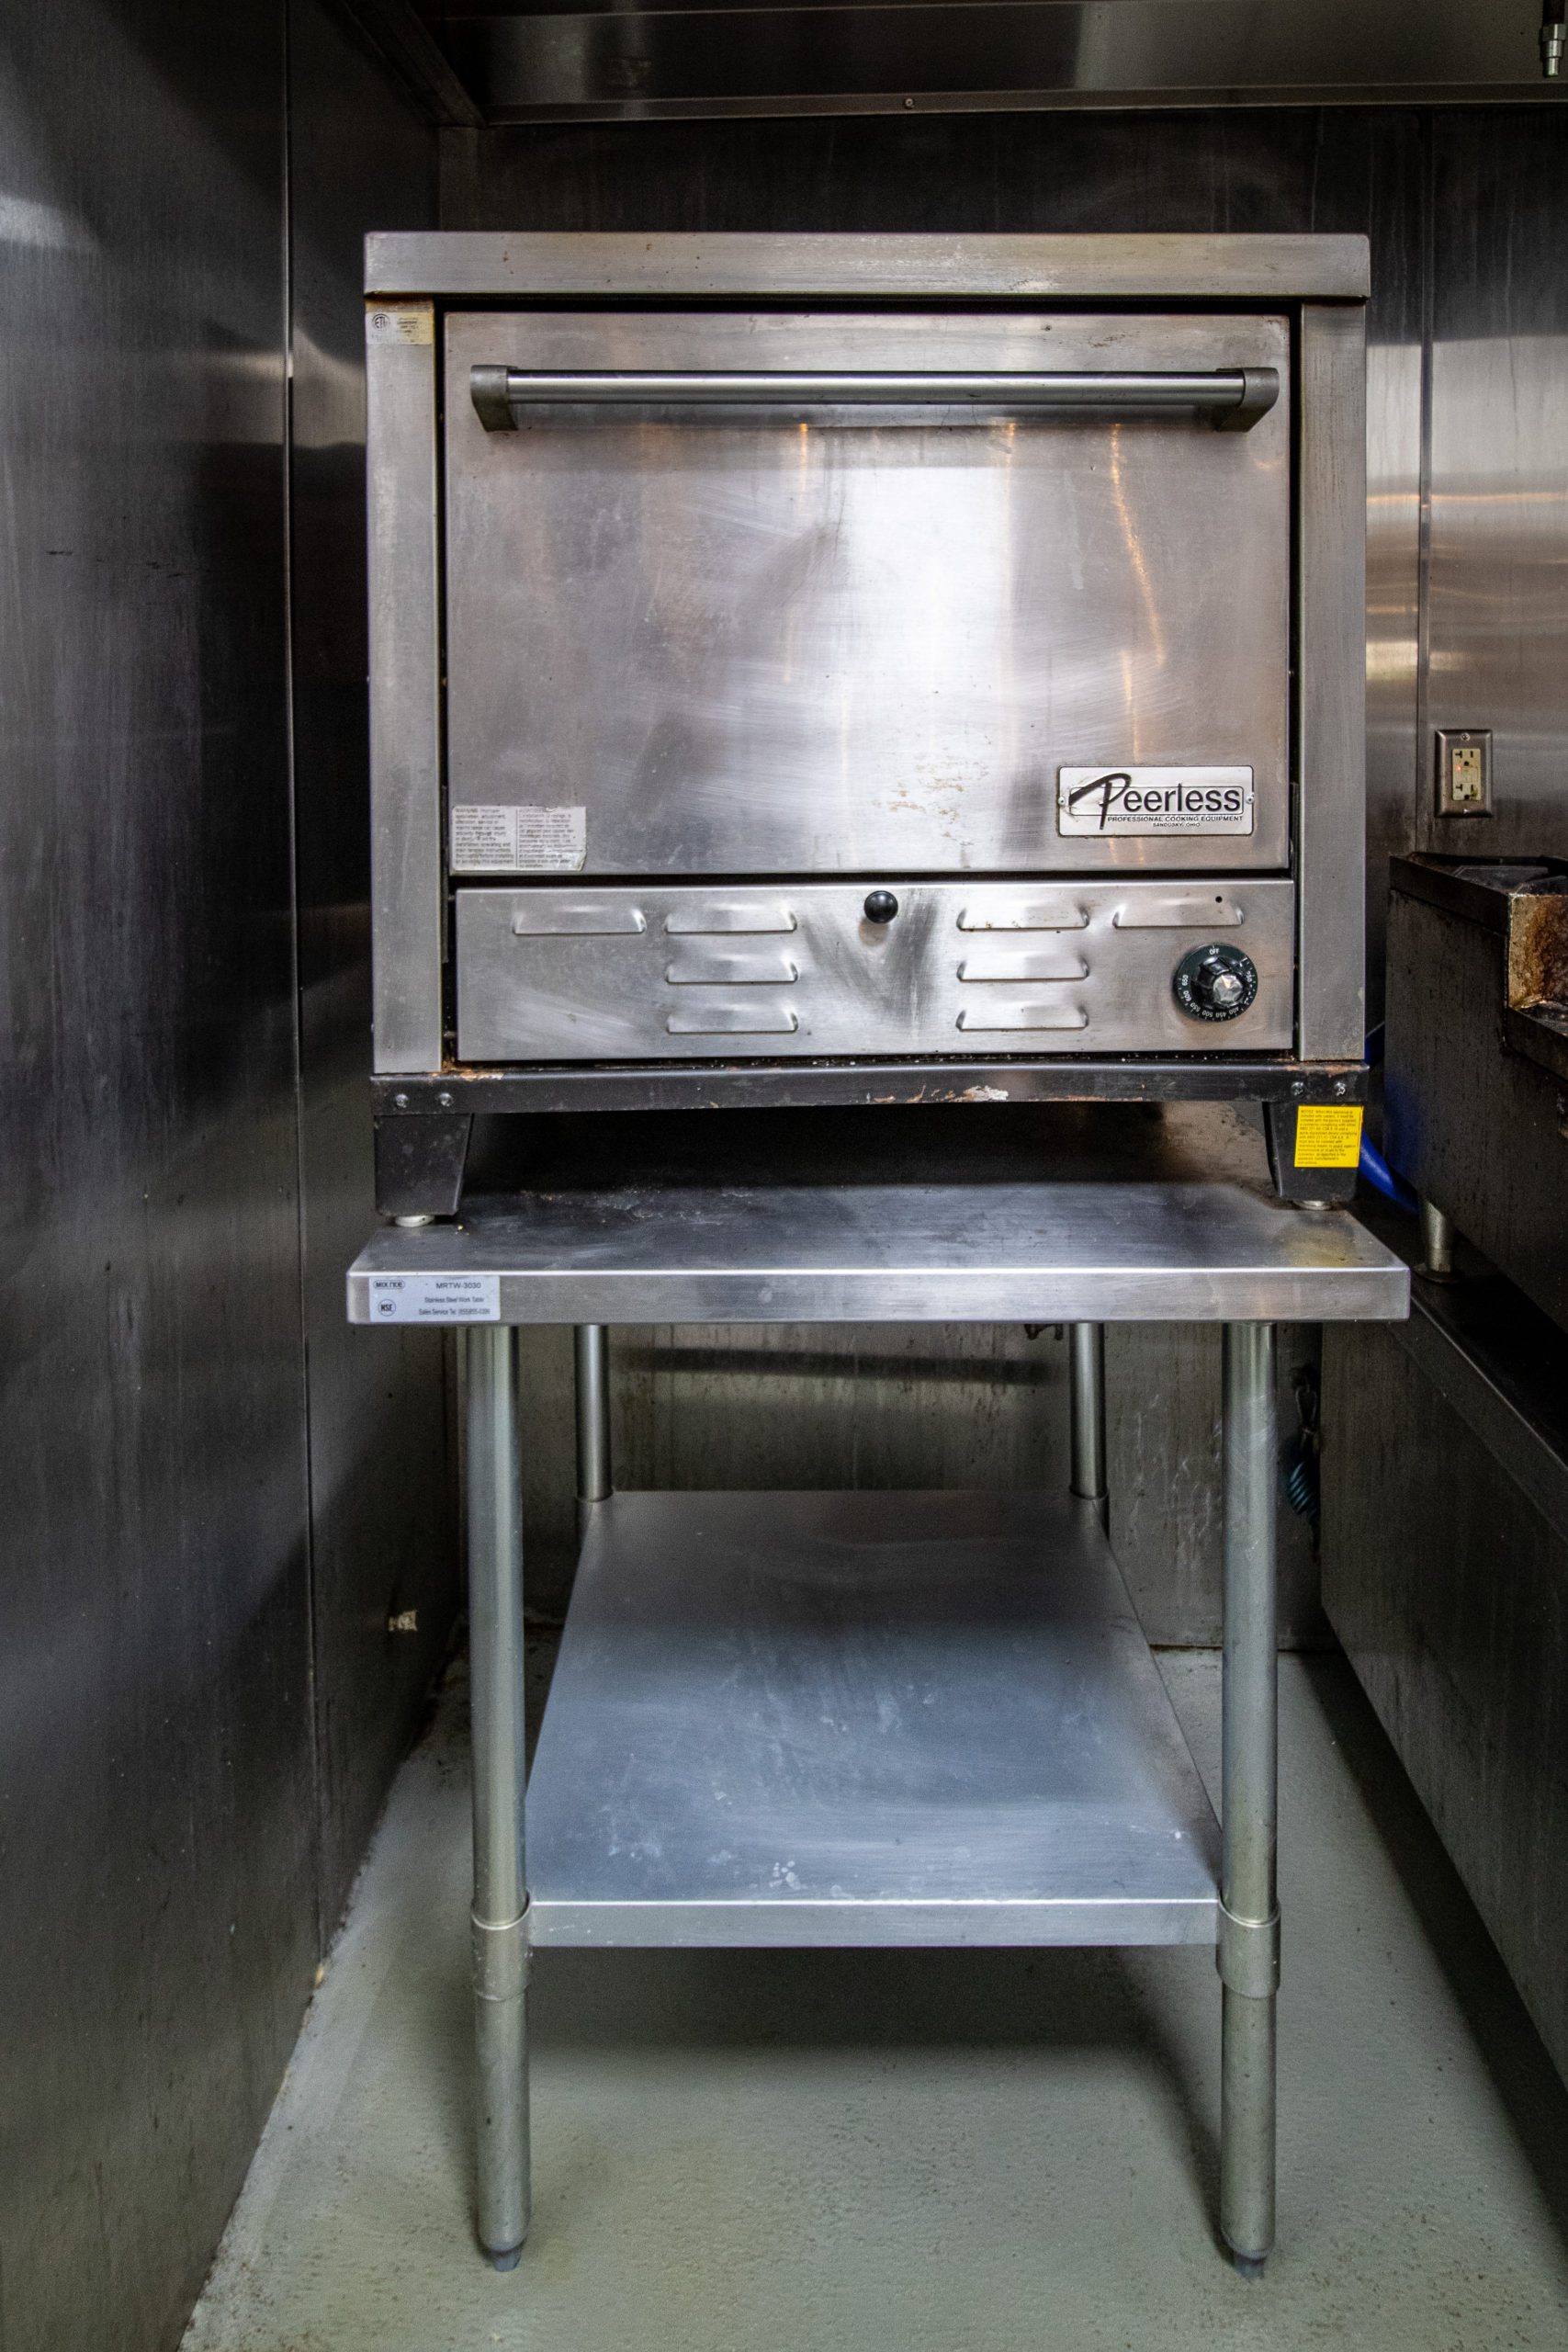 A commercial oven.